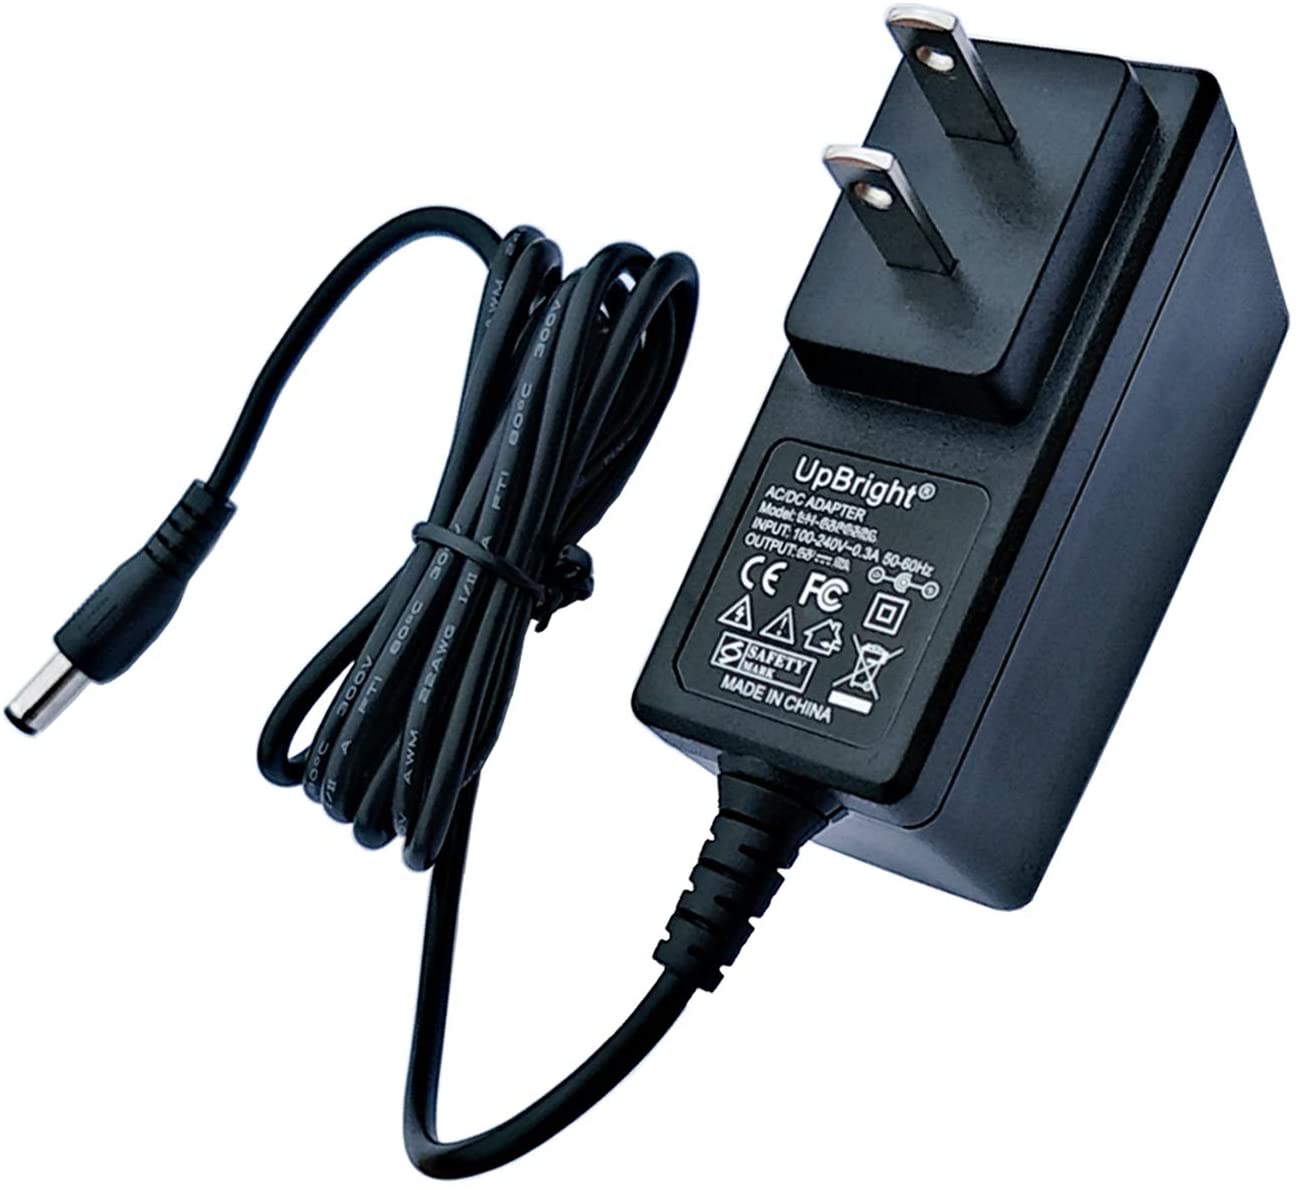 UPBRIGHT Adapter For Philips LFH 725 Mini Cassette Dictation Transcription Desktop Transcriber LFH 0725/00 LFH725 LFH0725 Power Supply Cord Cable PS Battery Charger - image 1 of 5